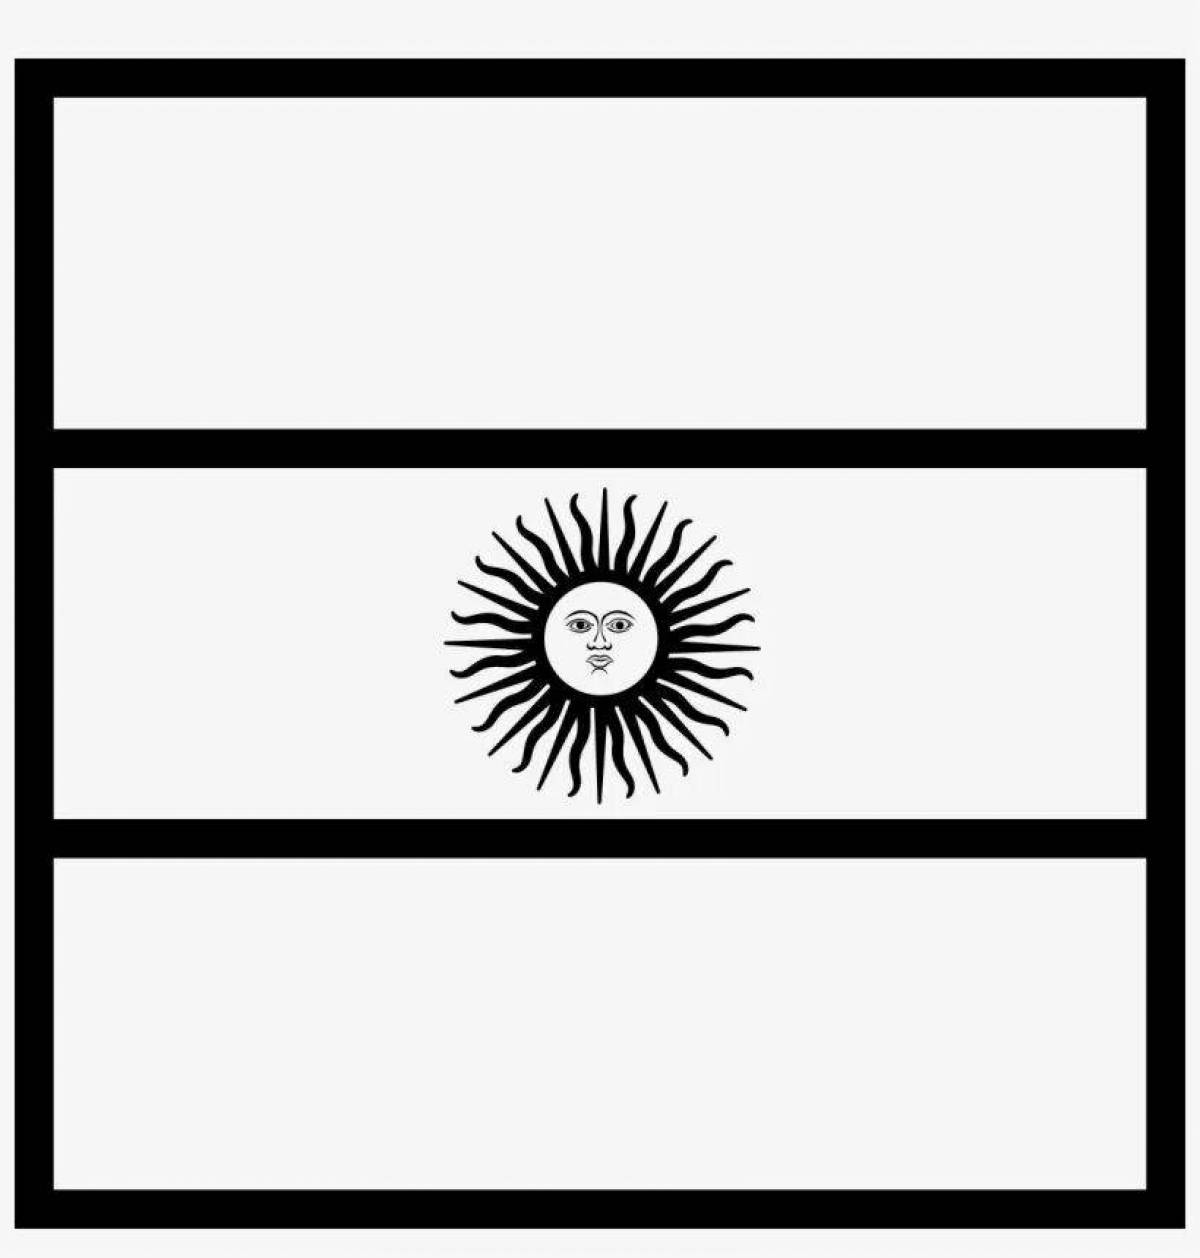 Coloring page with argentina flag